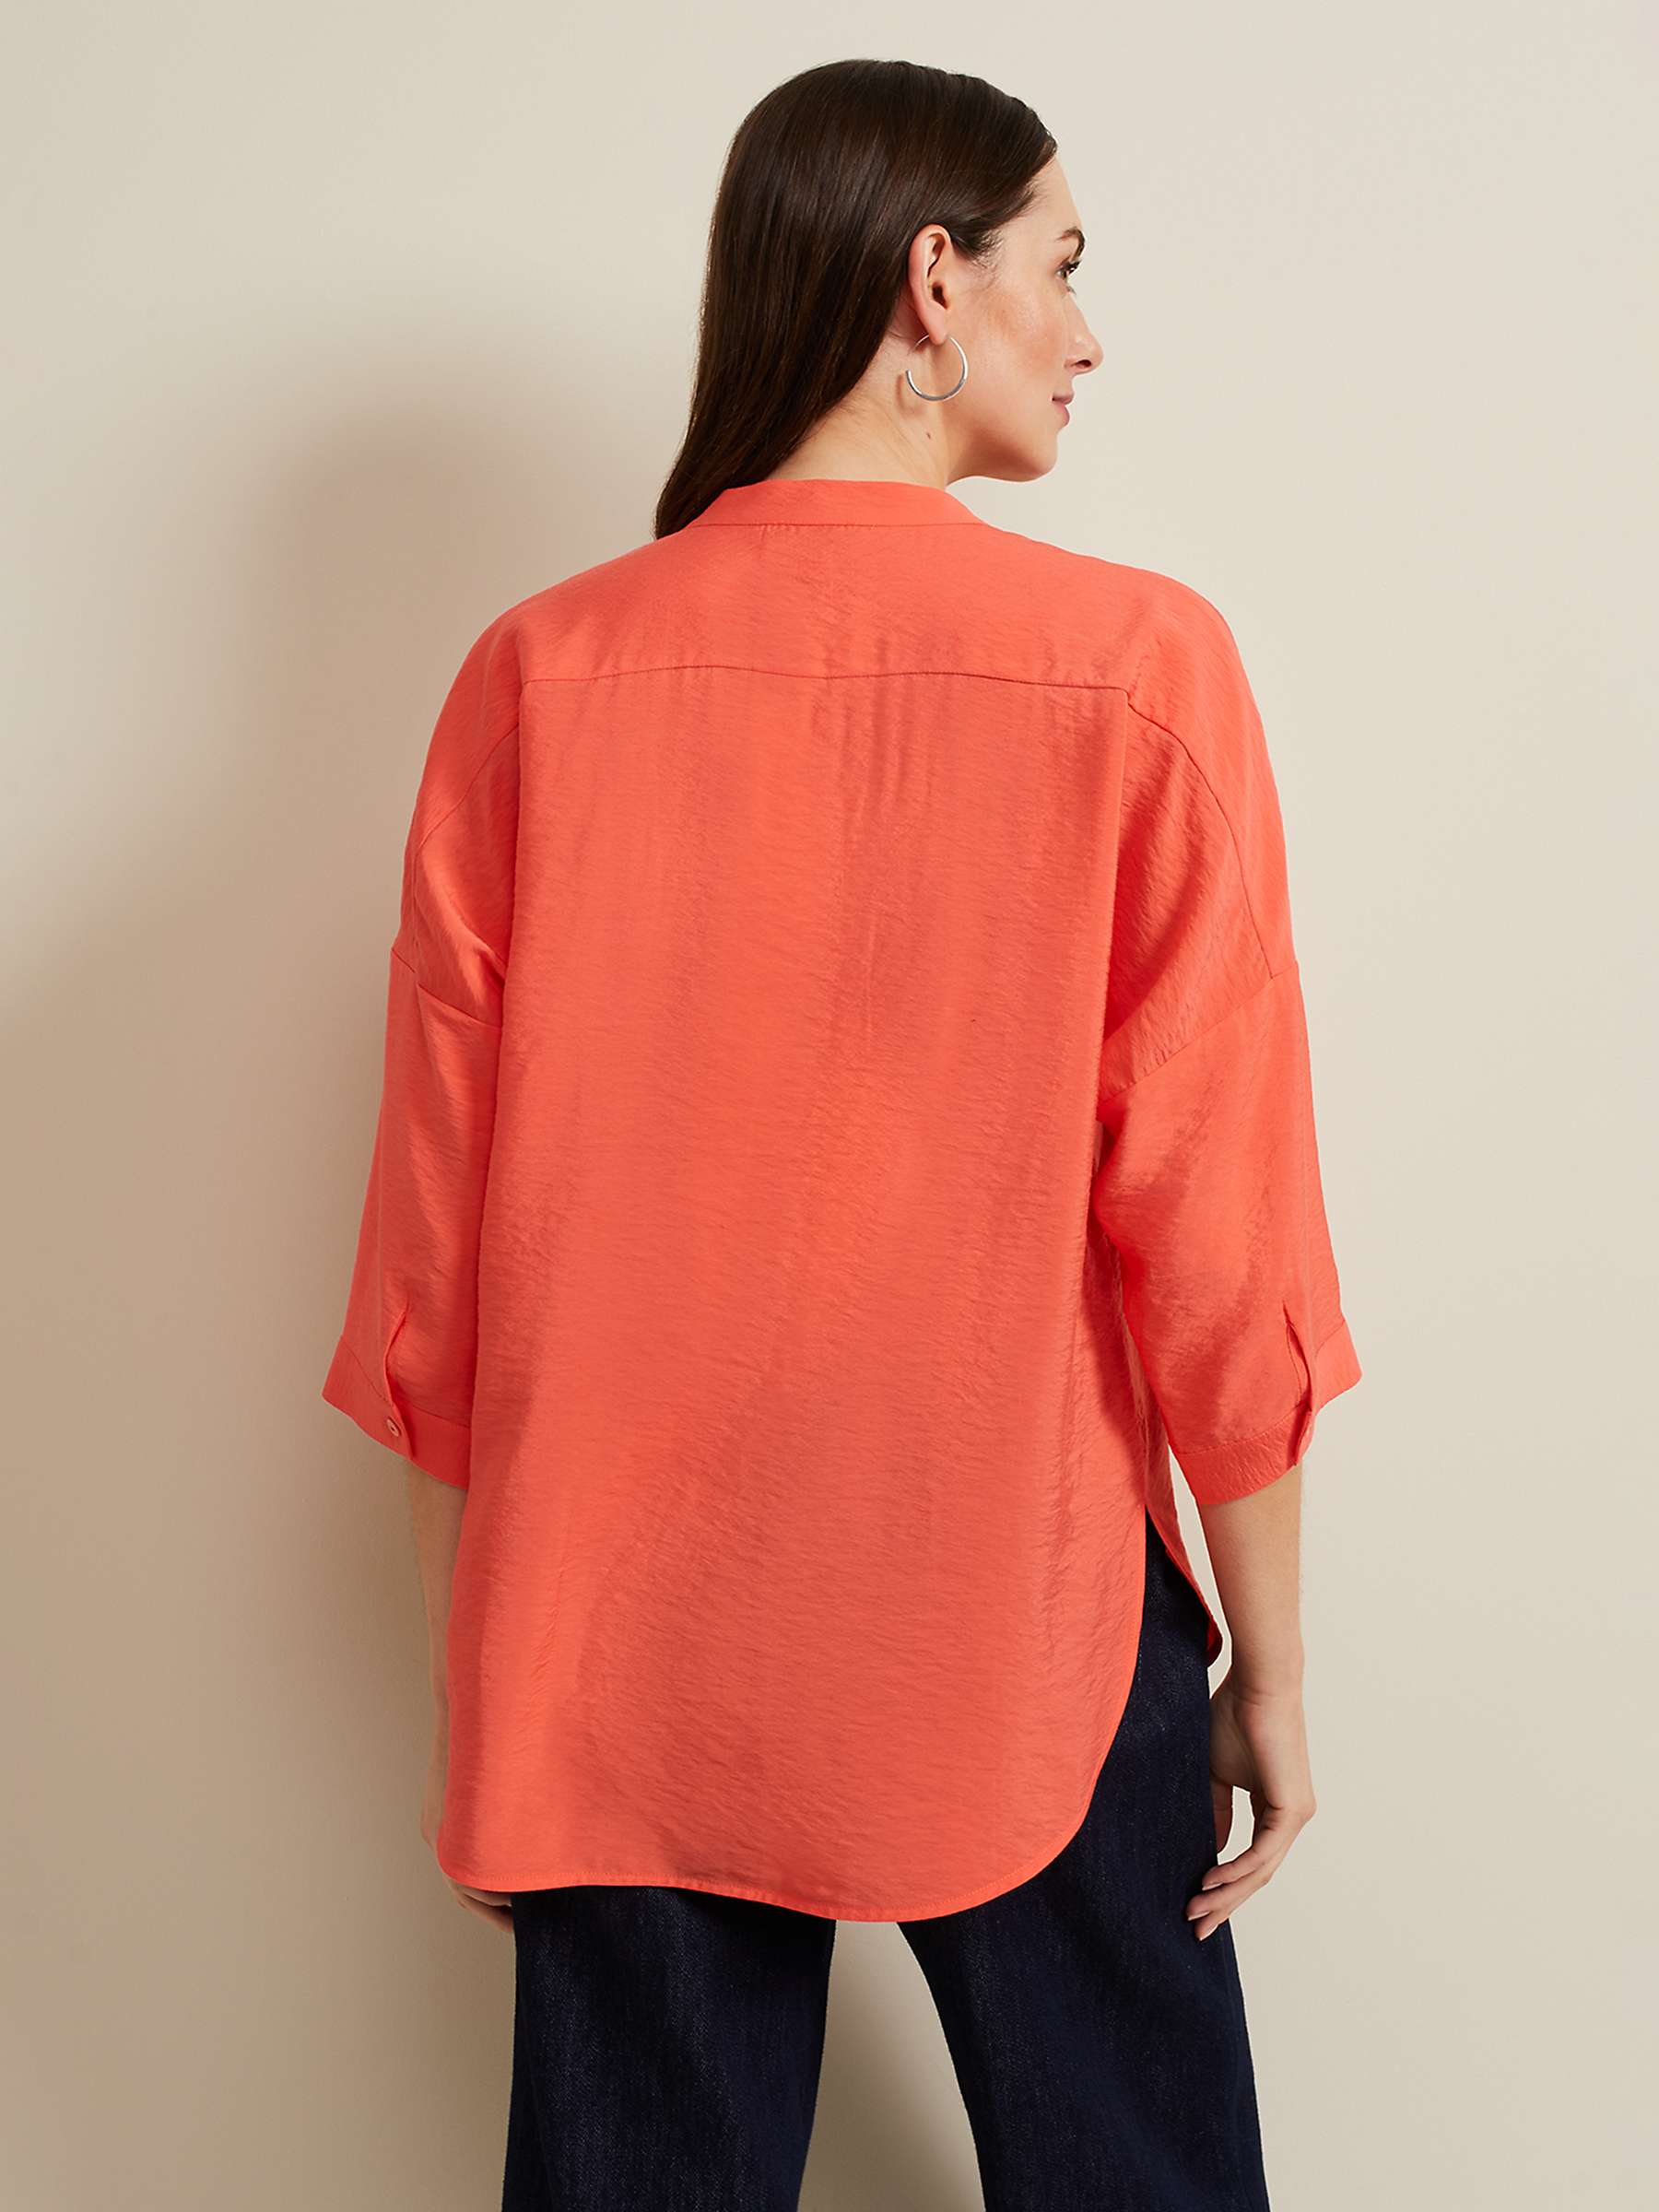 Buy Phase Eight Cynthia 3/4 Sleeve Shirt, Coral Online at johnlewis.com